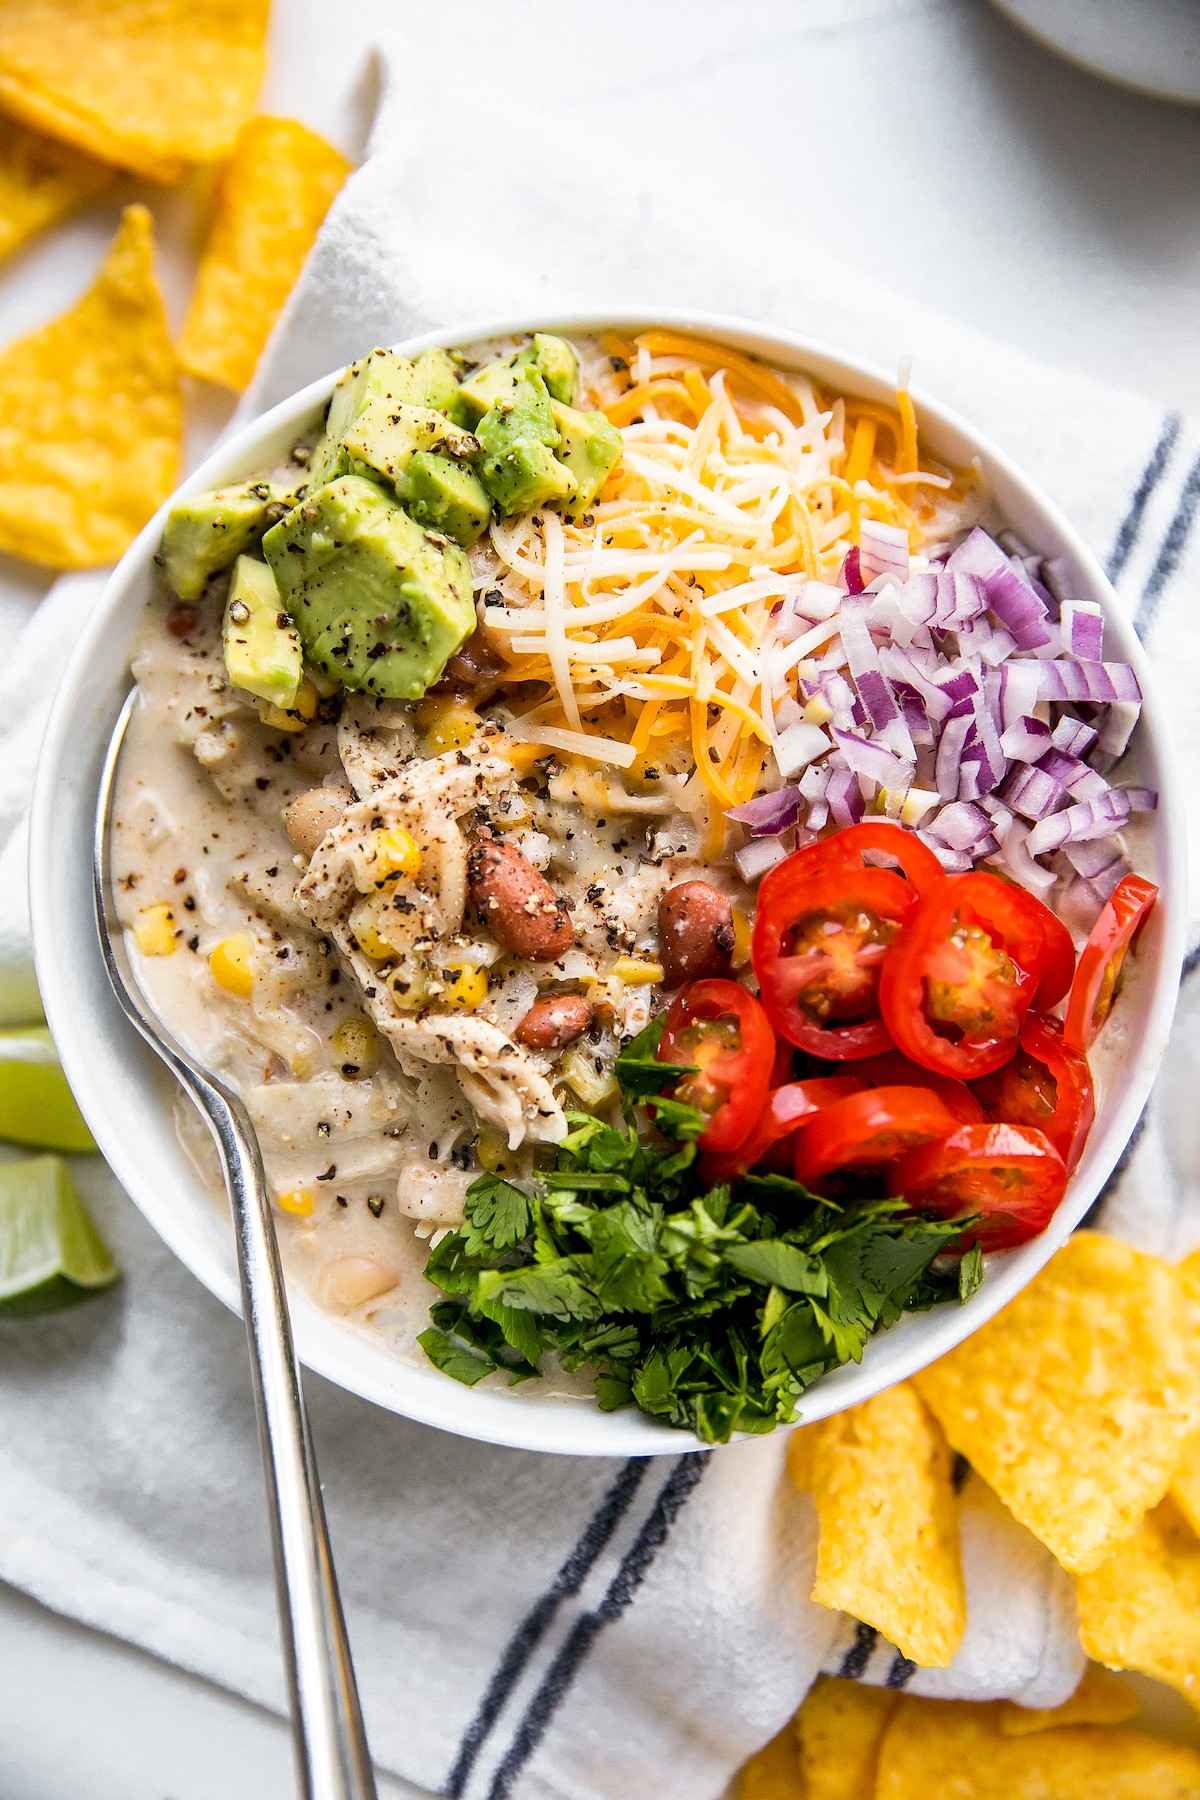 A large bowl of white chili with toppings.